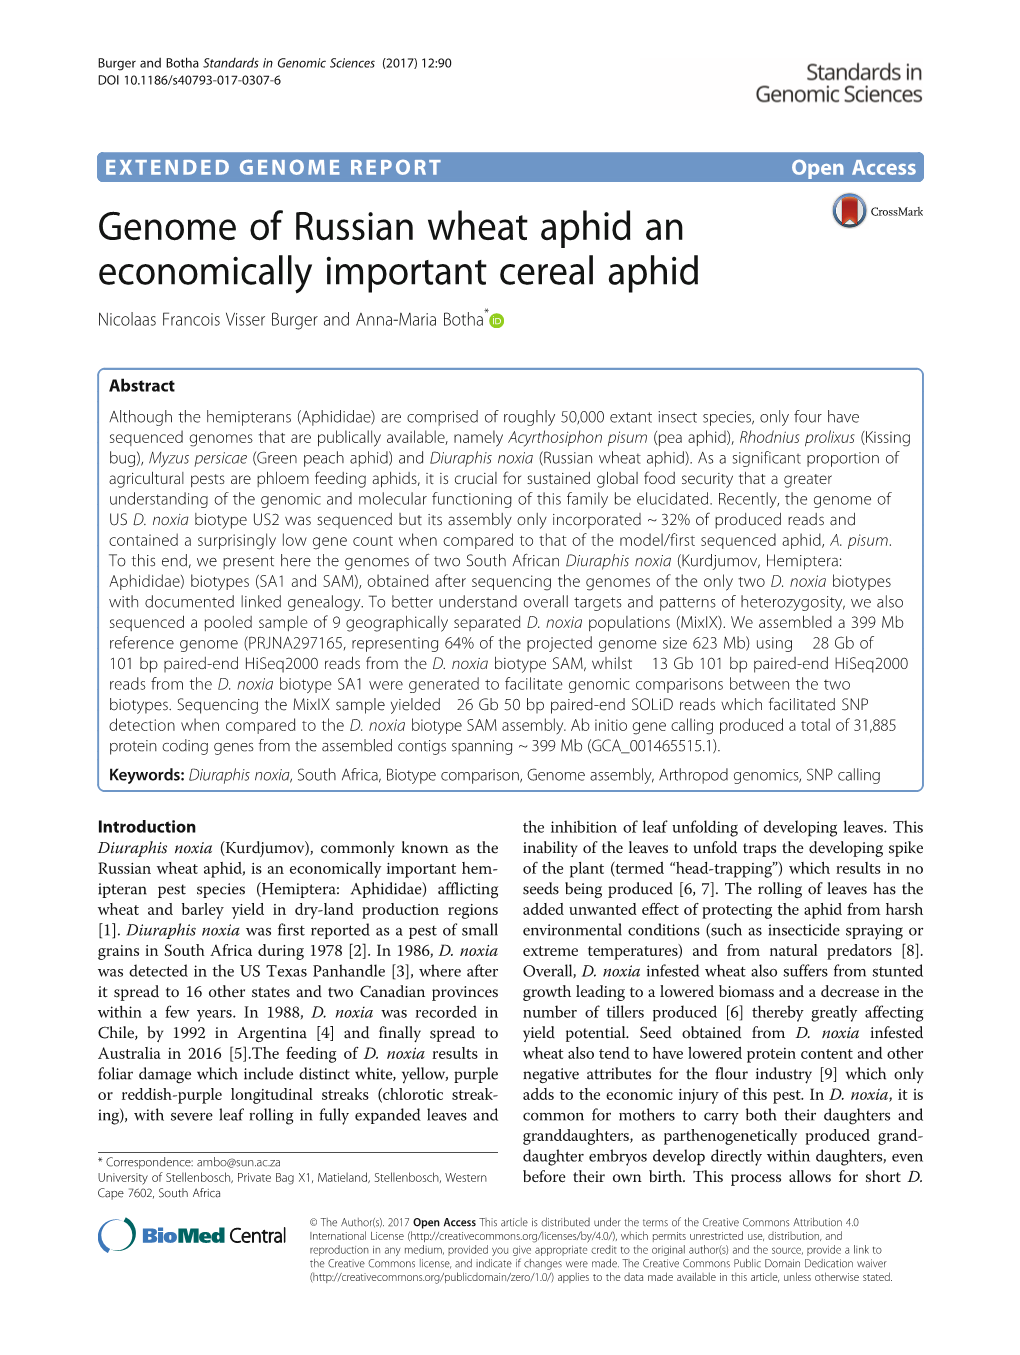 Genome of Russian Wheat Aphid an Economically Important Cereal Aphid Nicolaas Francois Visser Burger and Anna-Maria Botha*